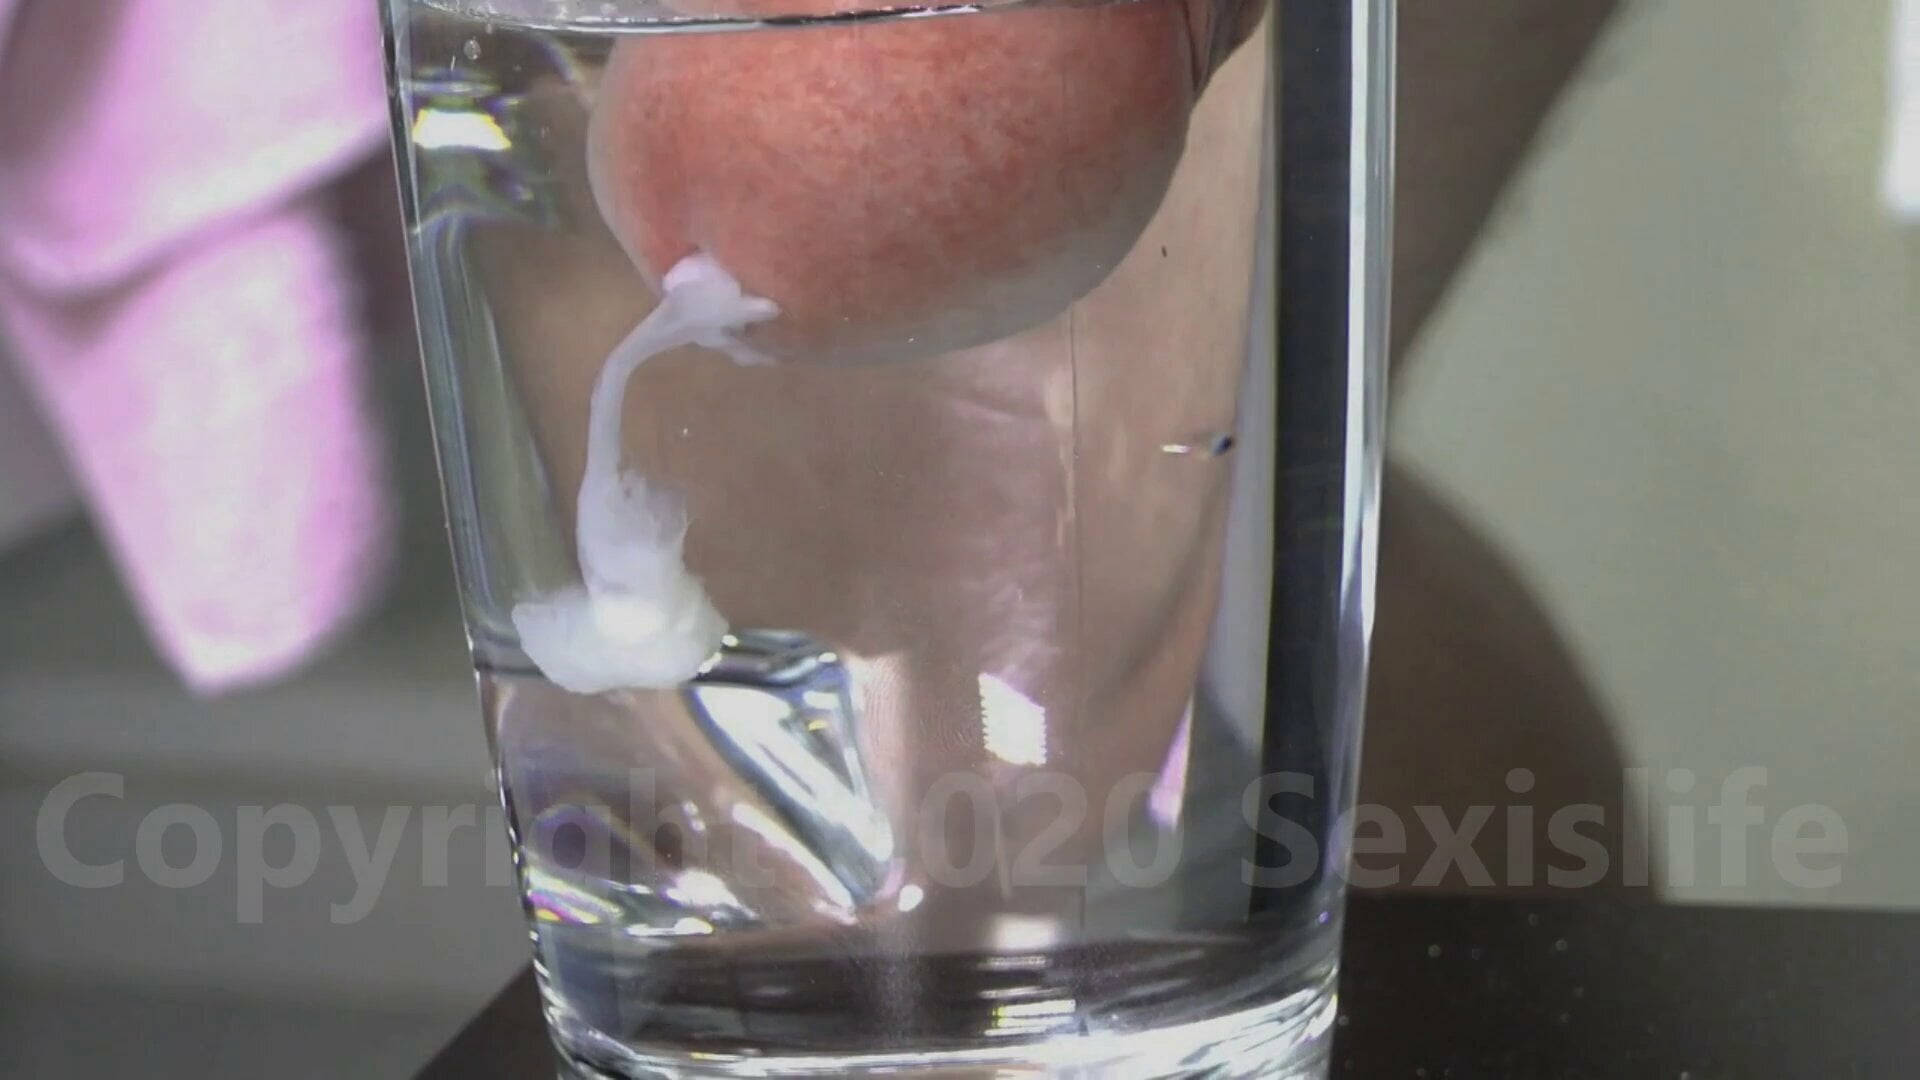 3 Submarine Cumshots in glass of water + slow motion - 4